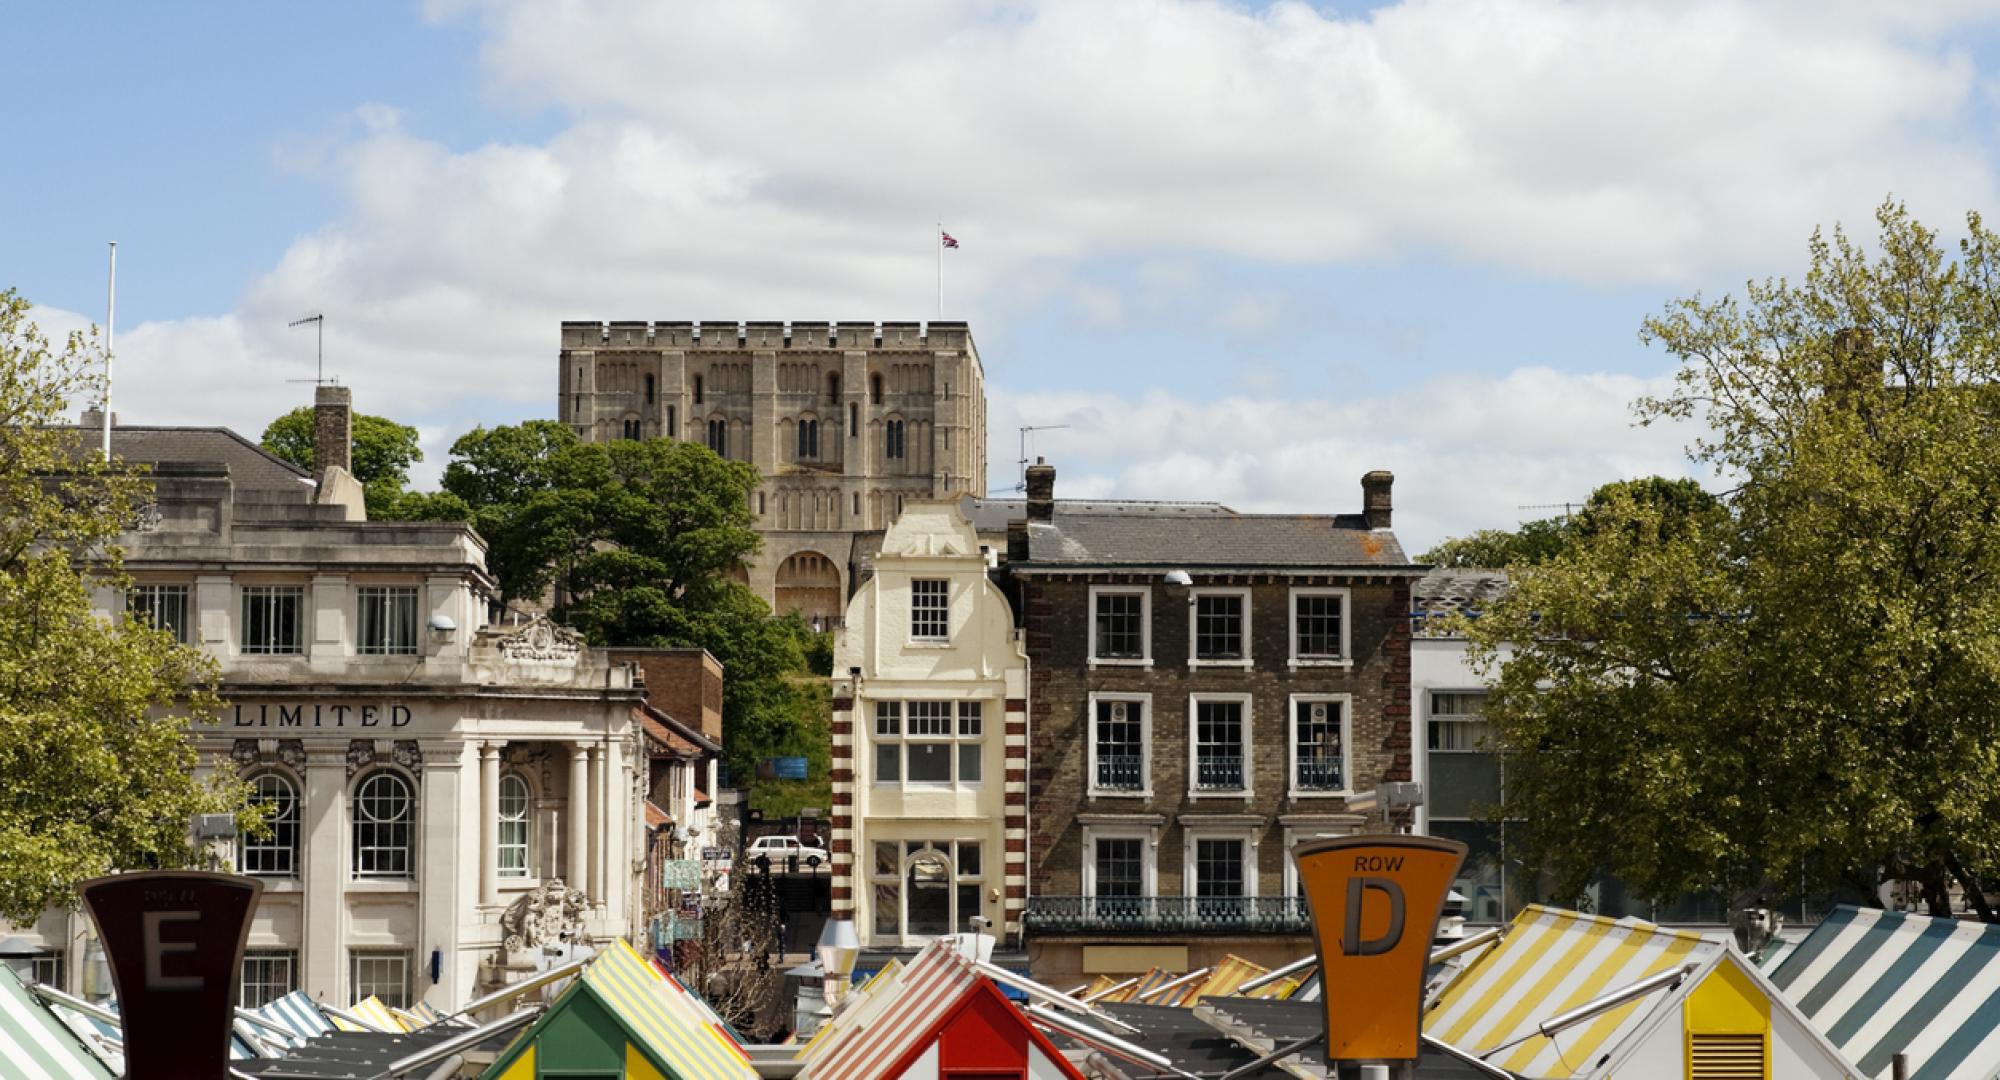 The famous market in the centre of Norwich, with Norwich Castle behind.